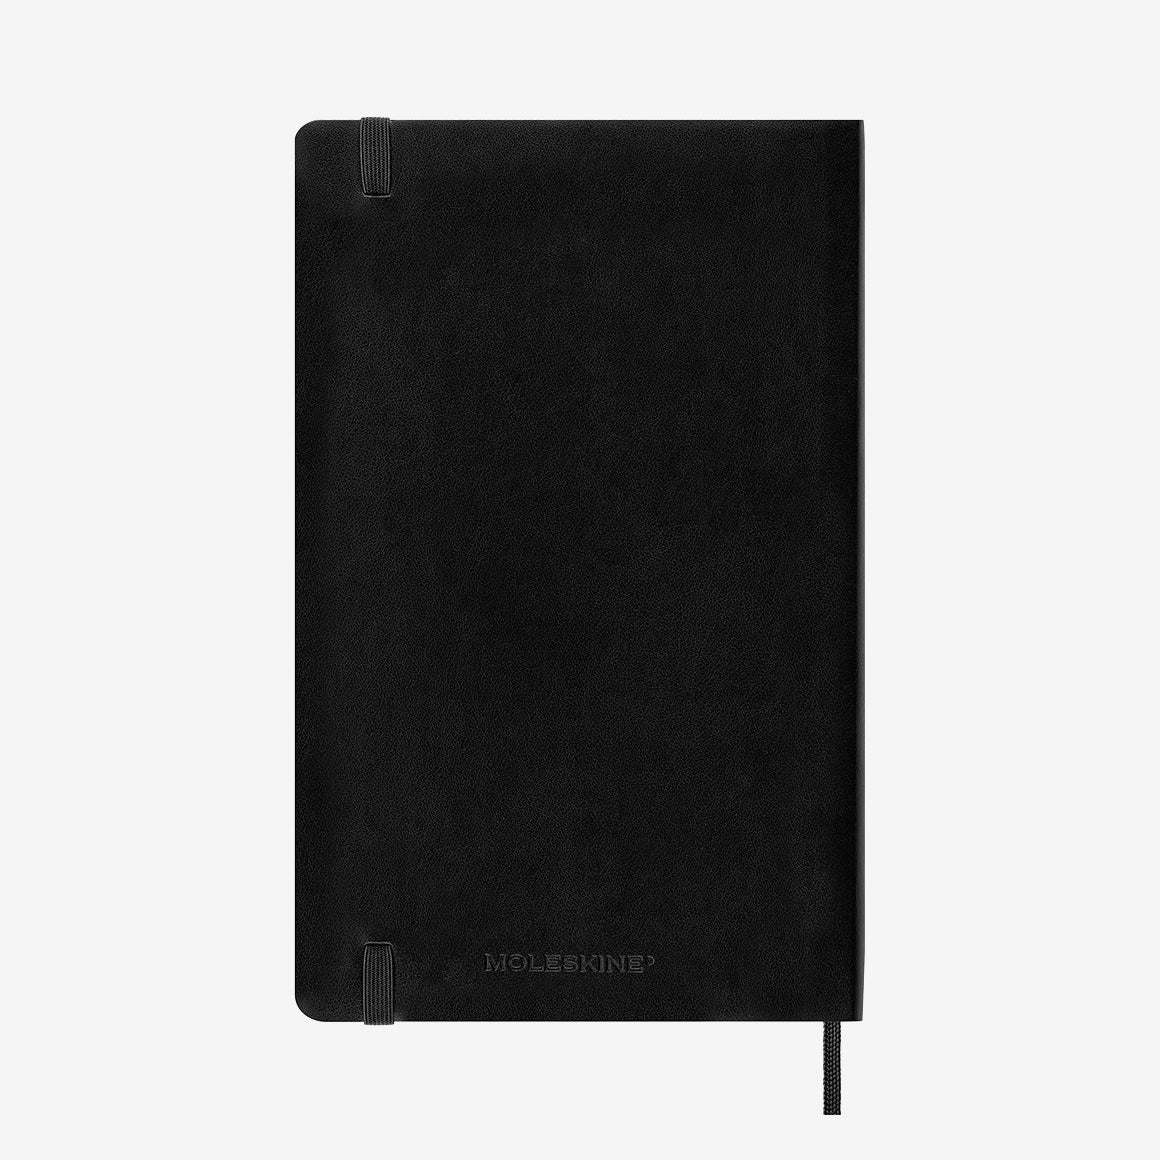 Moleskine Daily Planner 2024, A5 (Softcover)